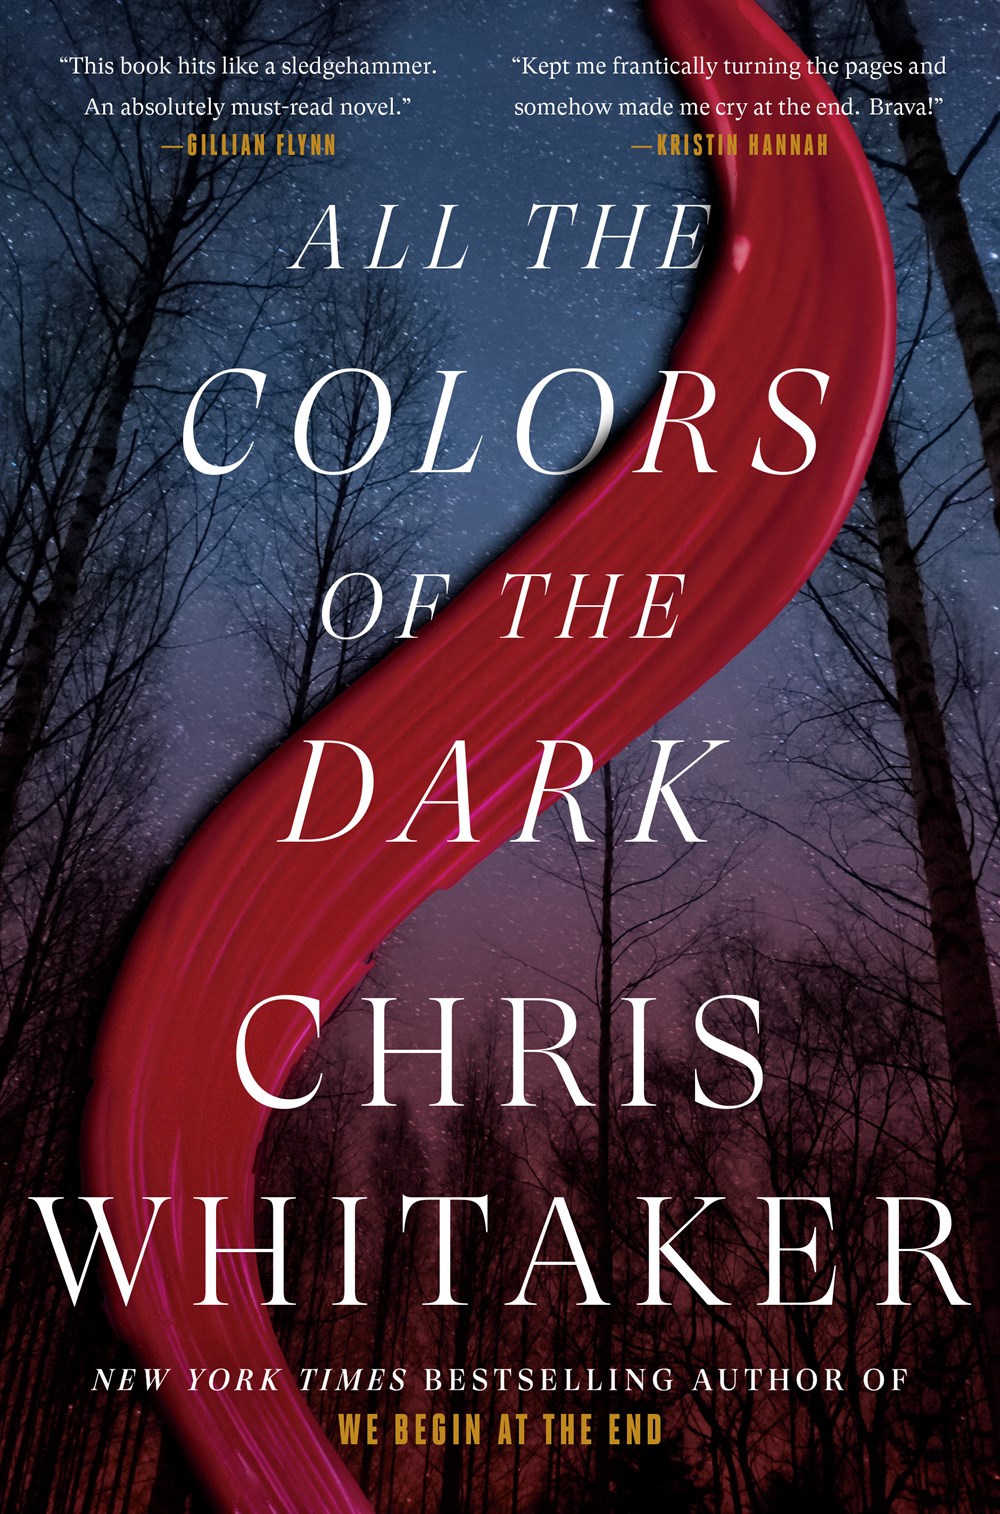 Read-Alikes for ‘All the Colors of the Dark’ by Chris Whitaker | LibraryReads